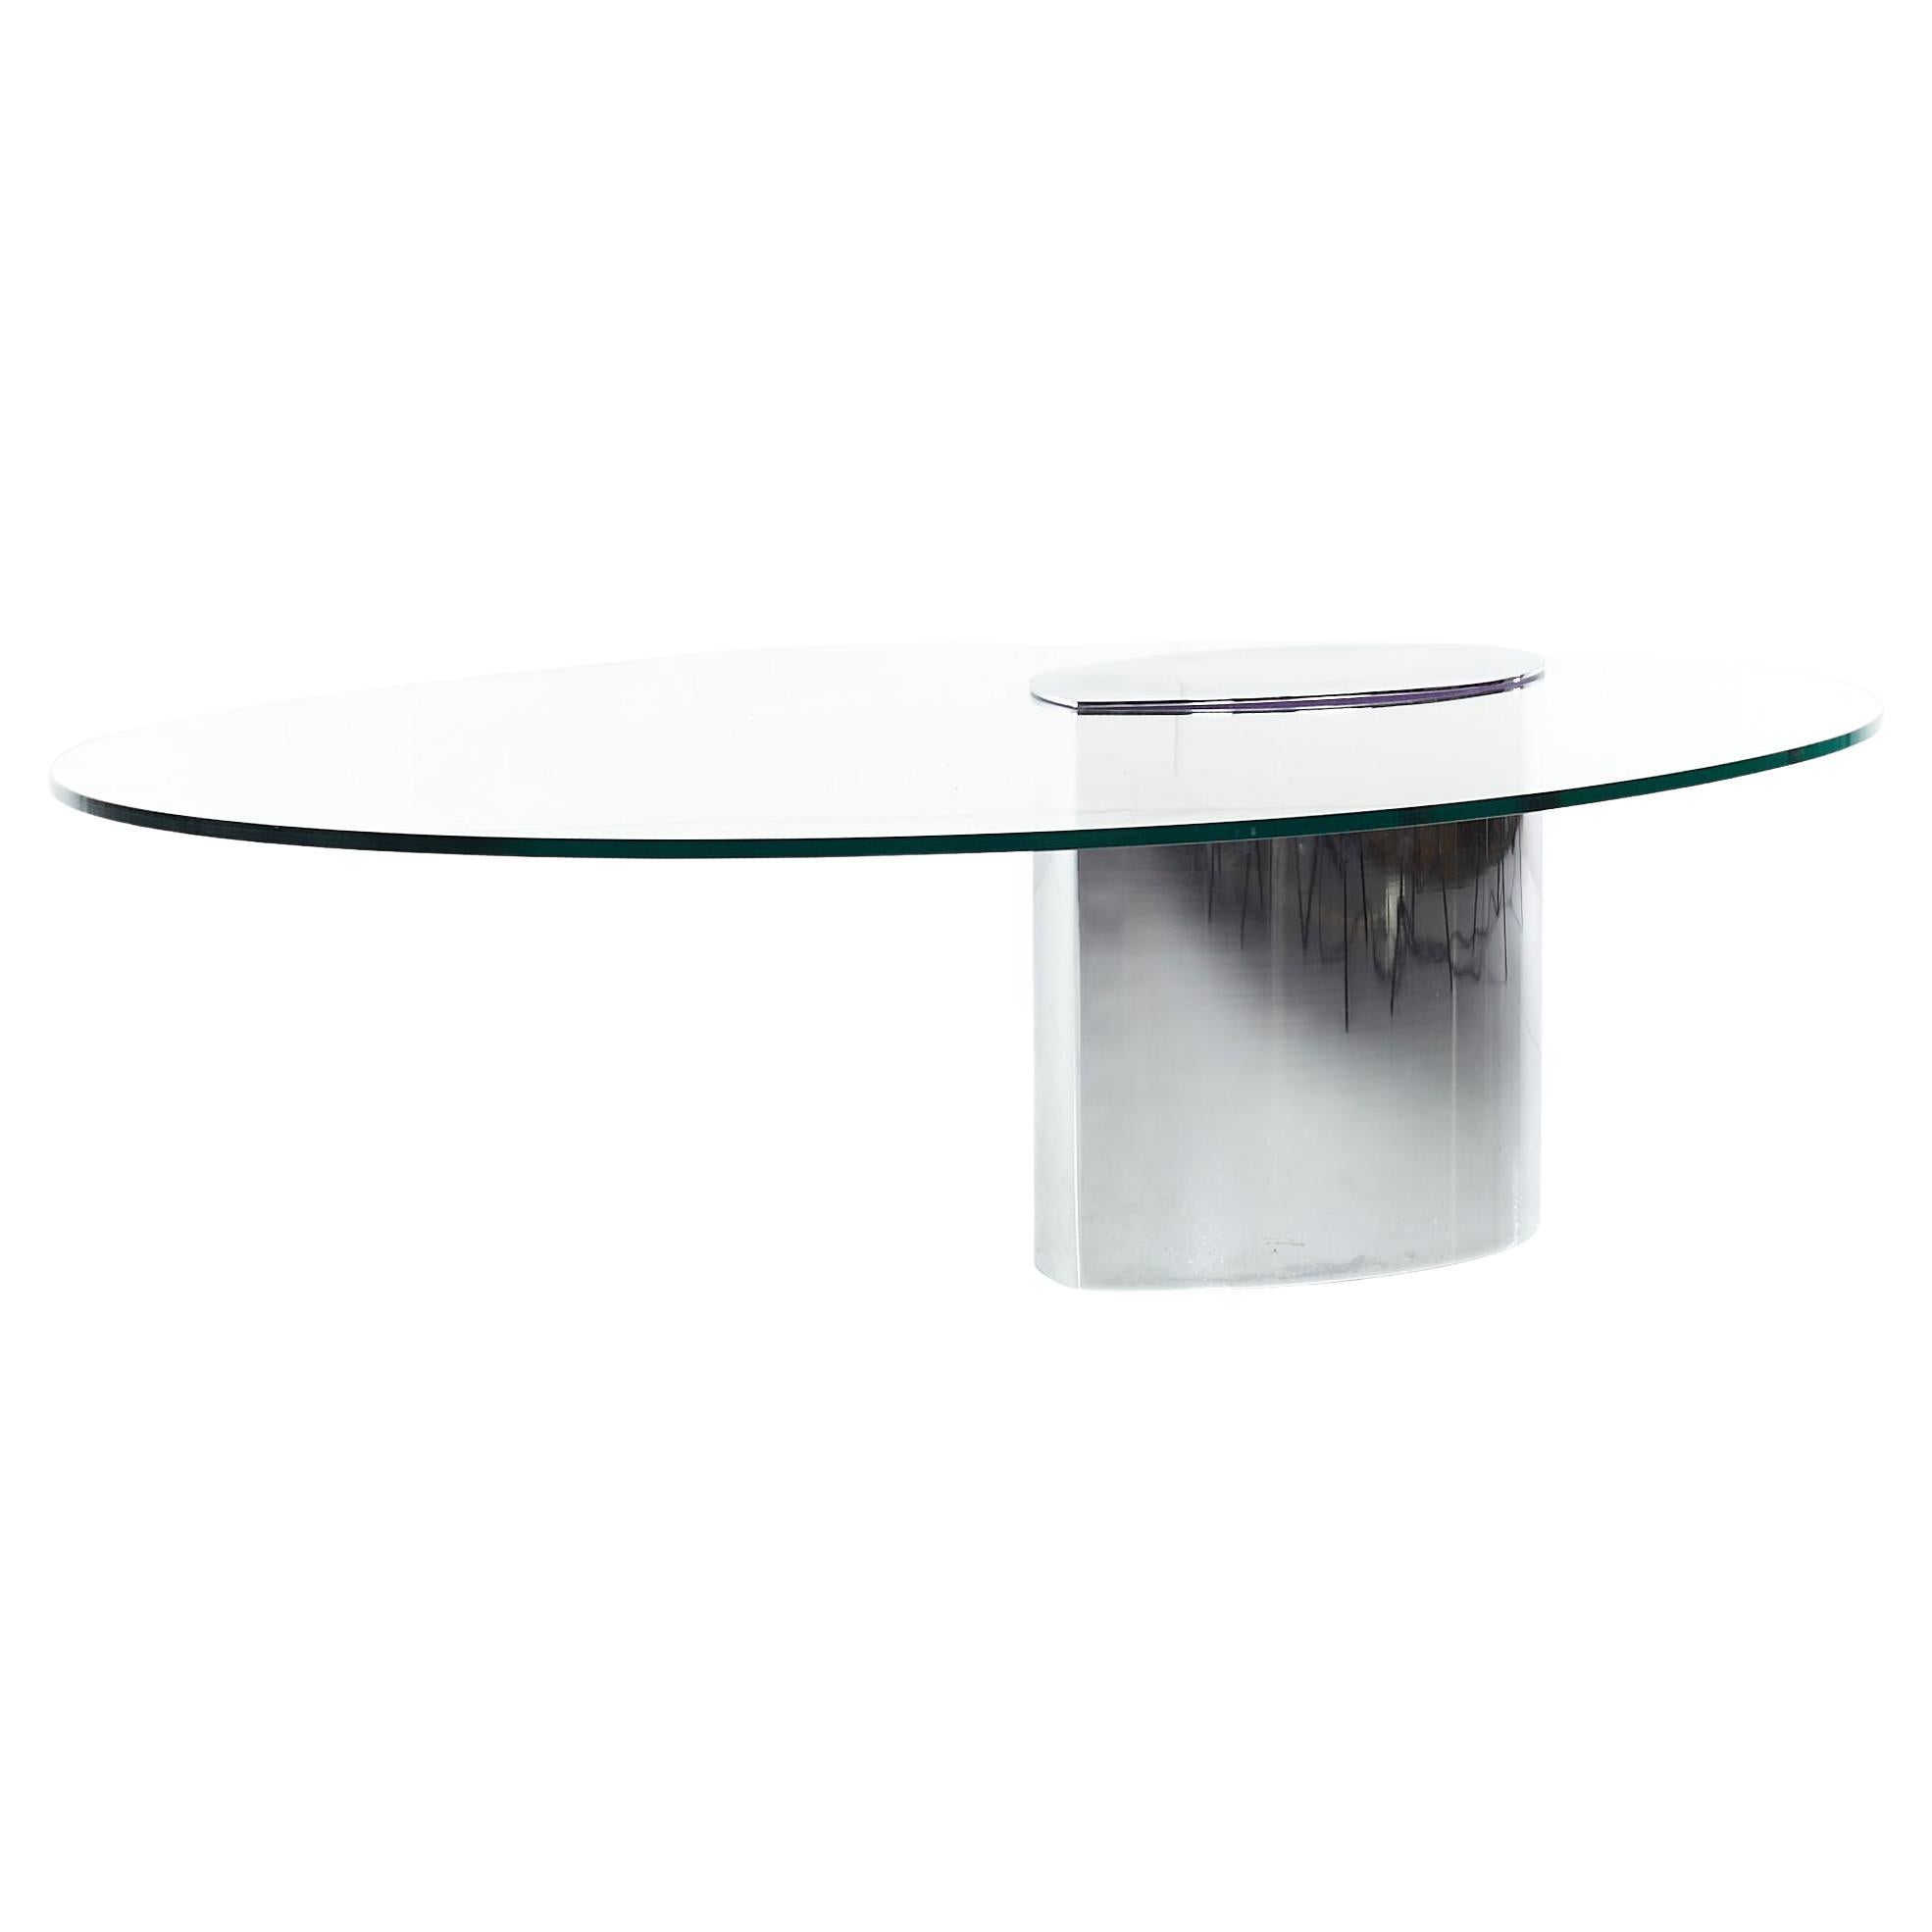 Cini Boeri for Knoll Lunario Mid Century Stainless Steel Coffee Table